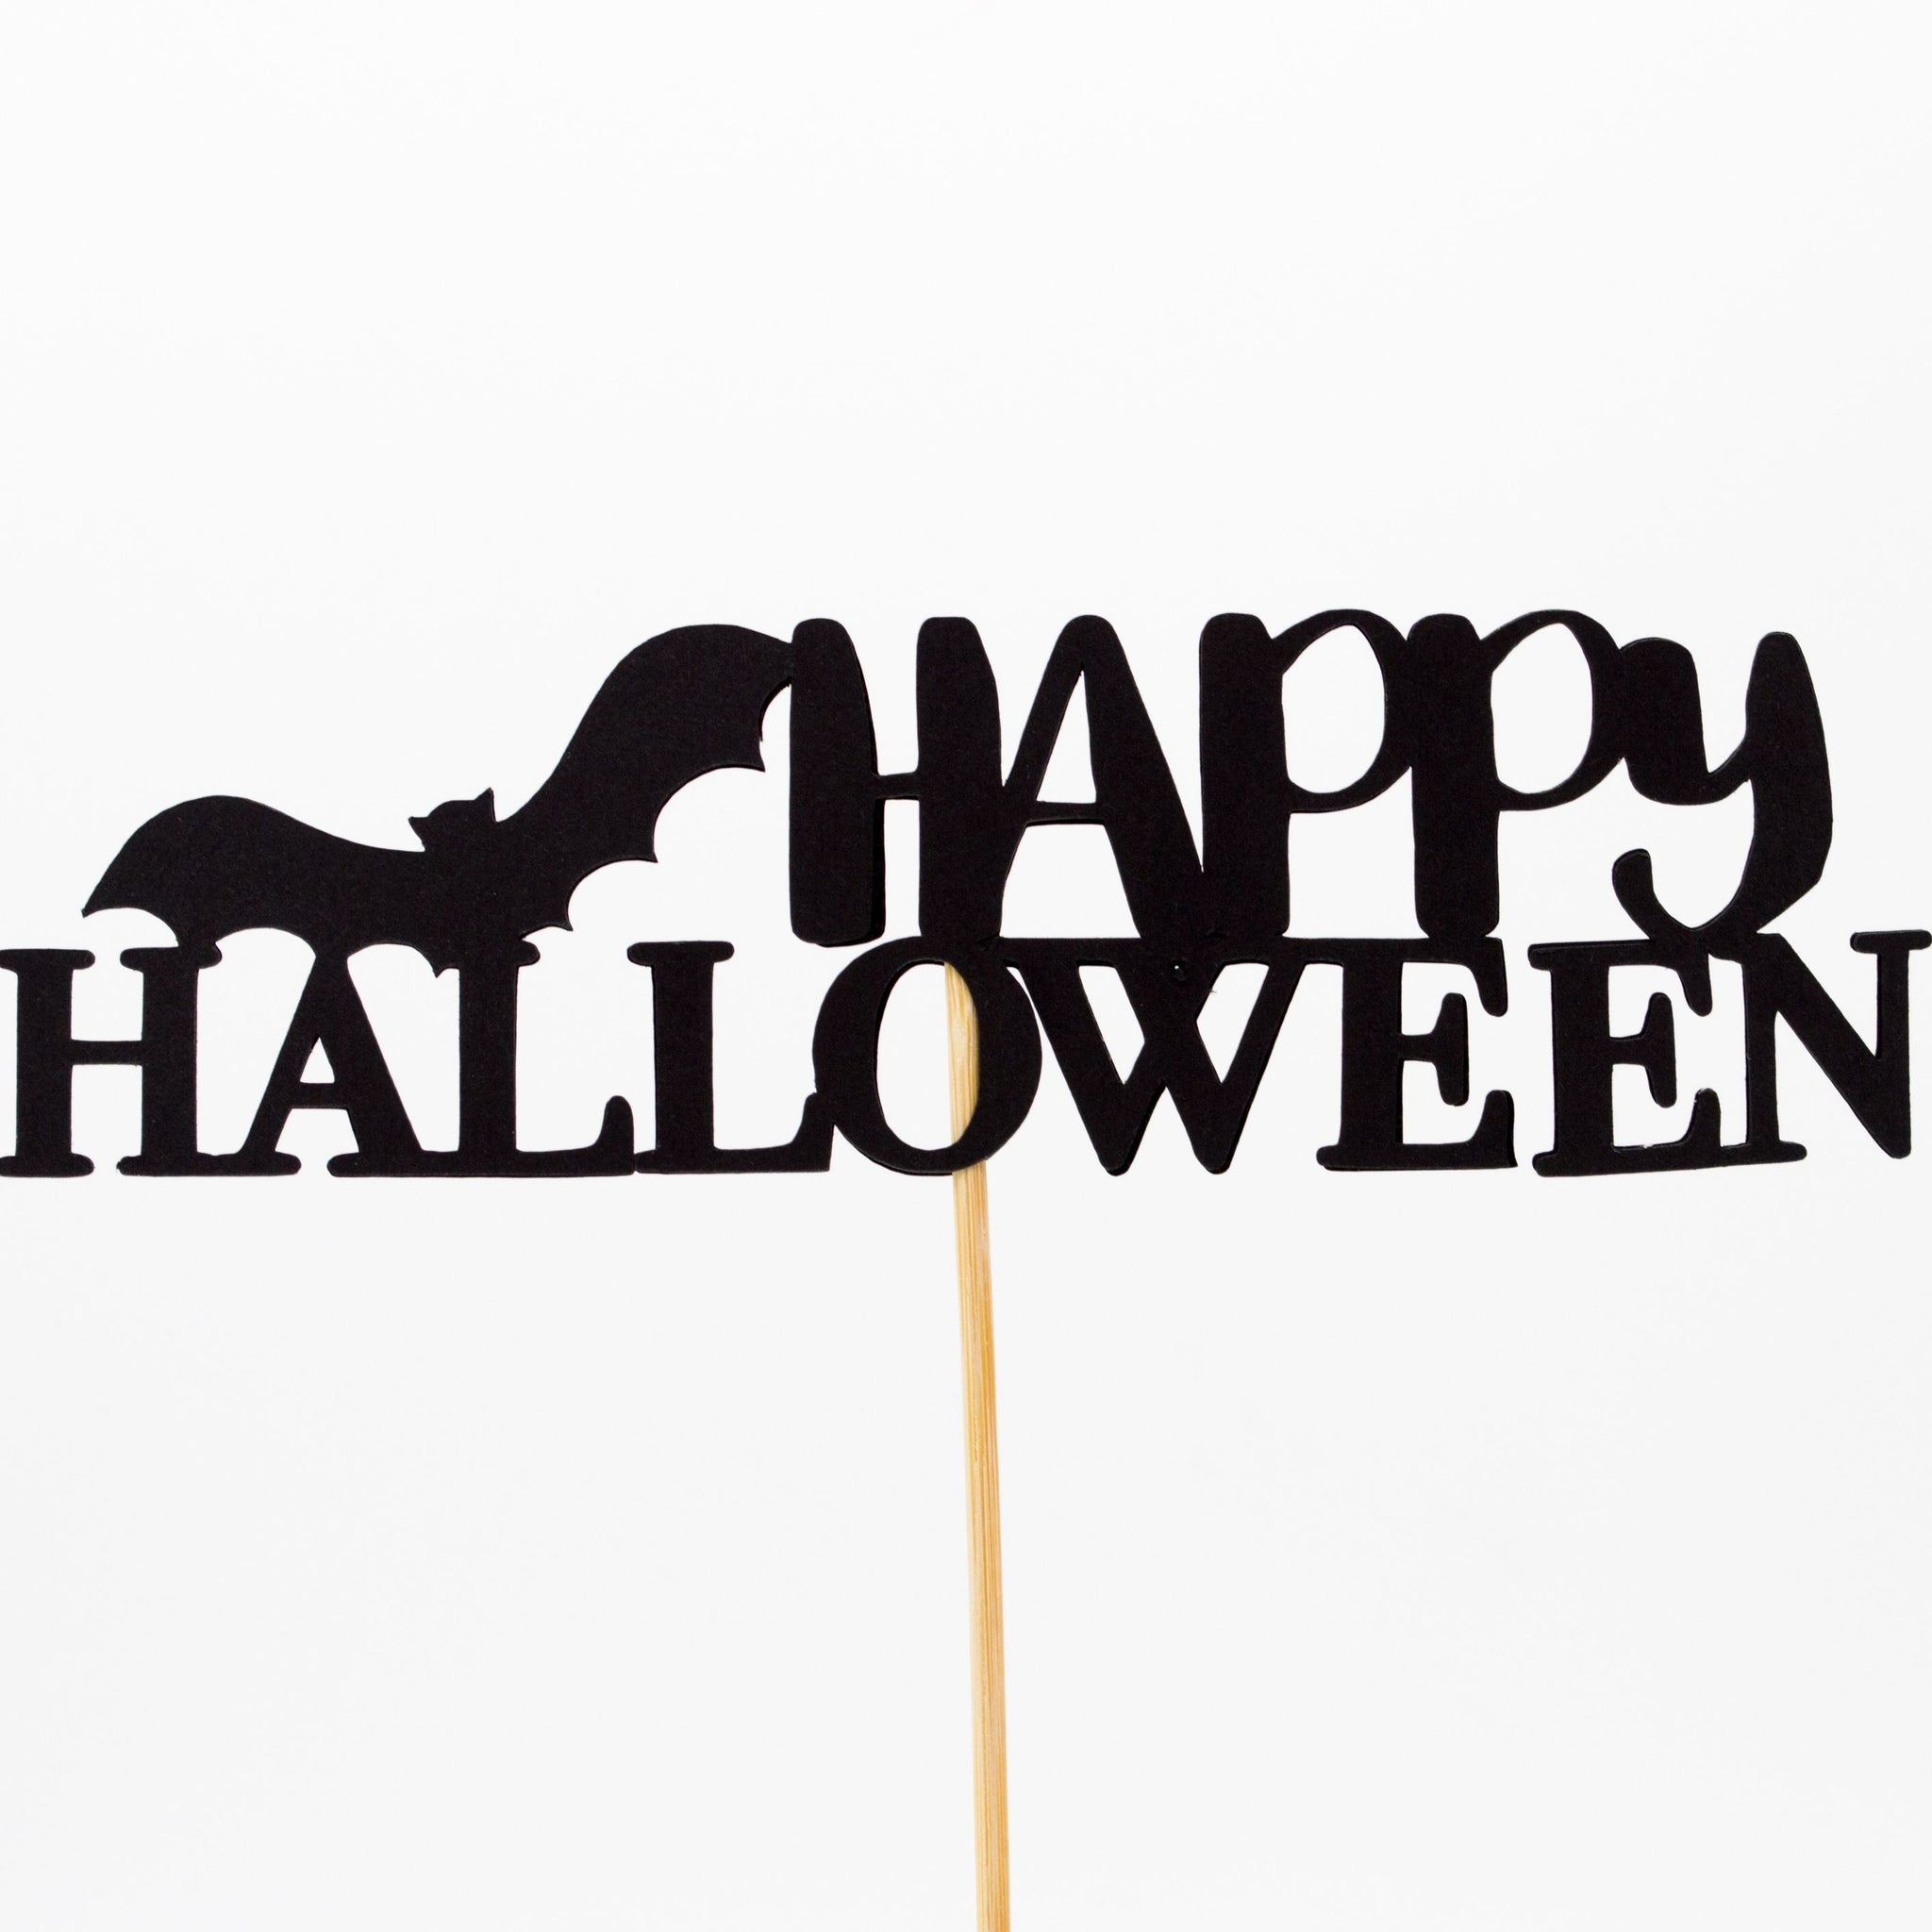 Trick Or Treat: Tips For A Sustainable Halloween